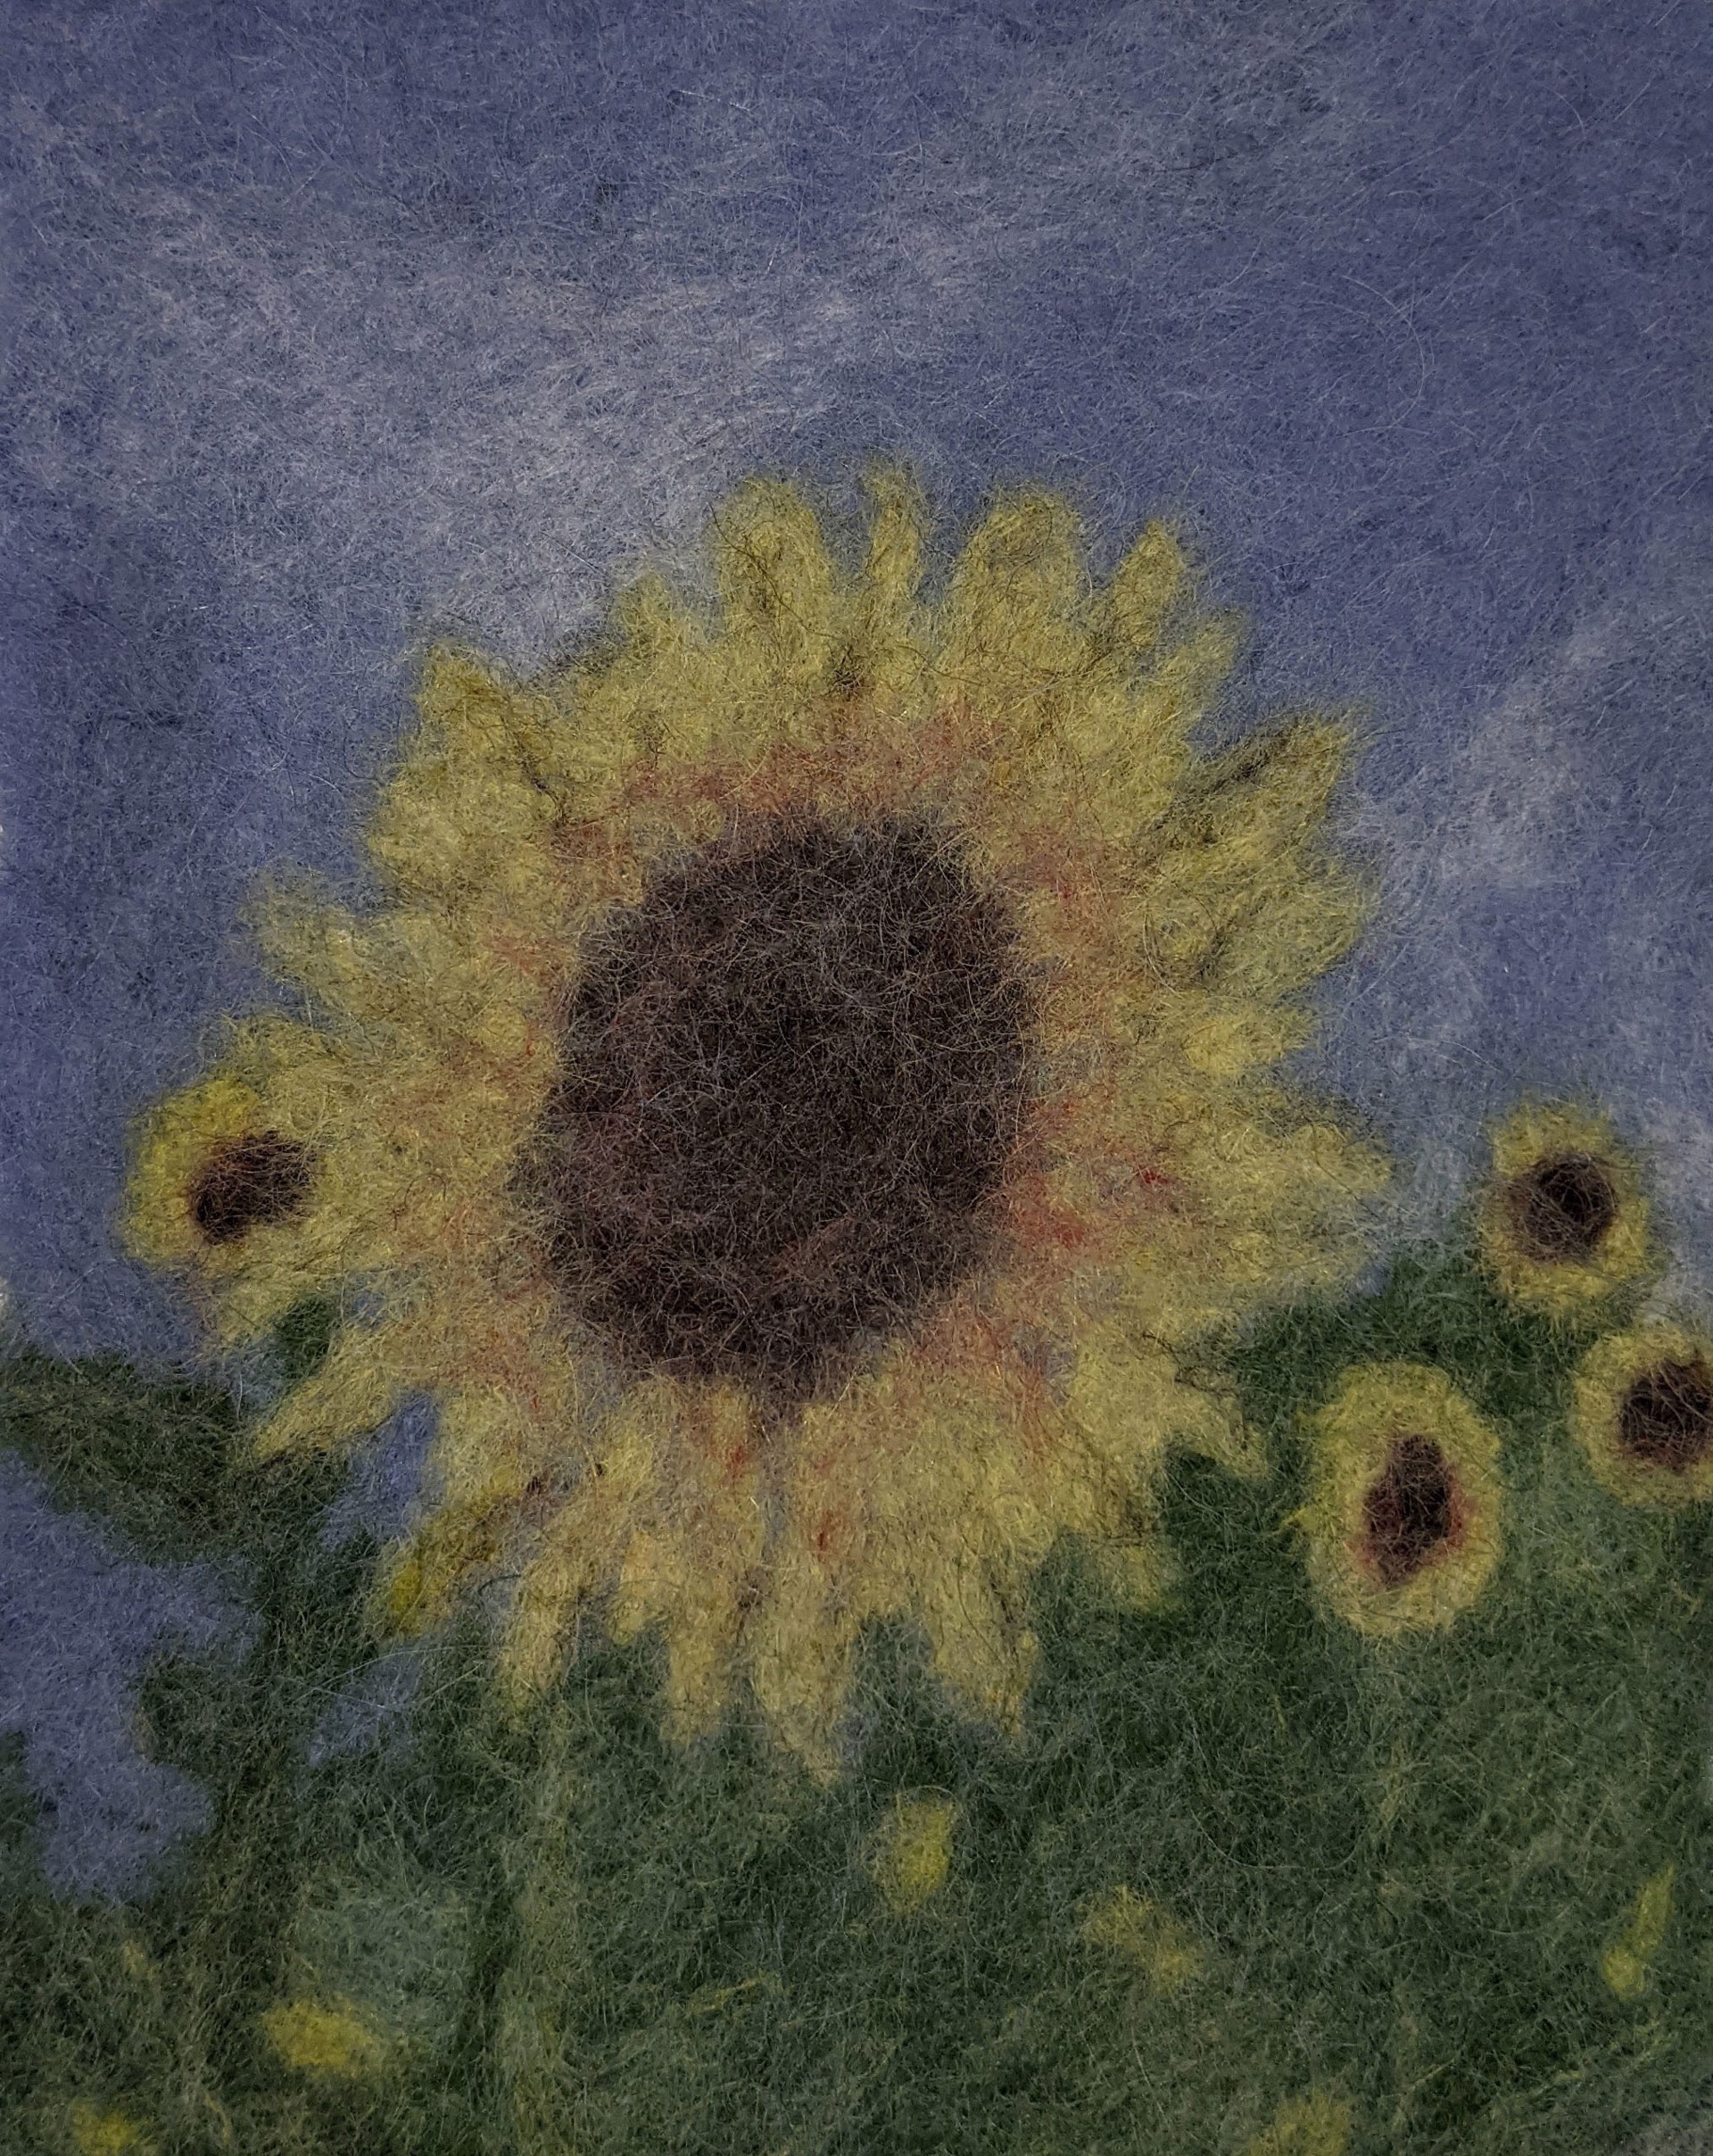 “Sunflower Field” by Alicia Marshall